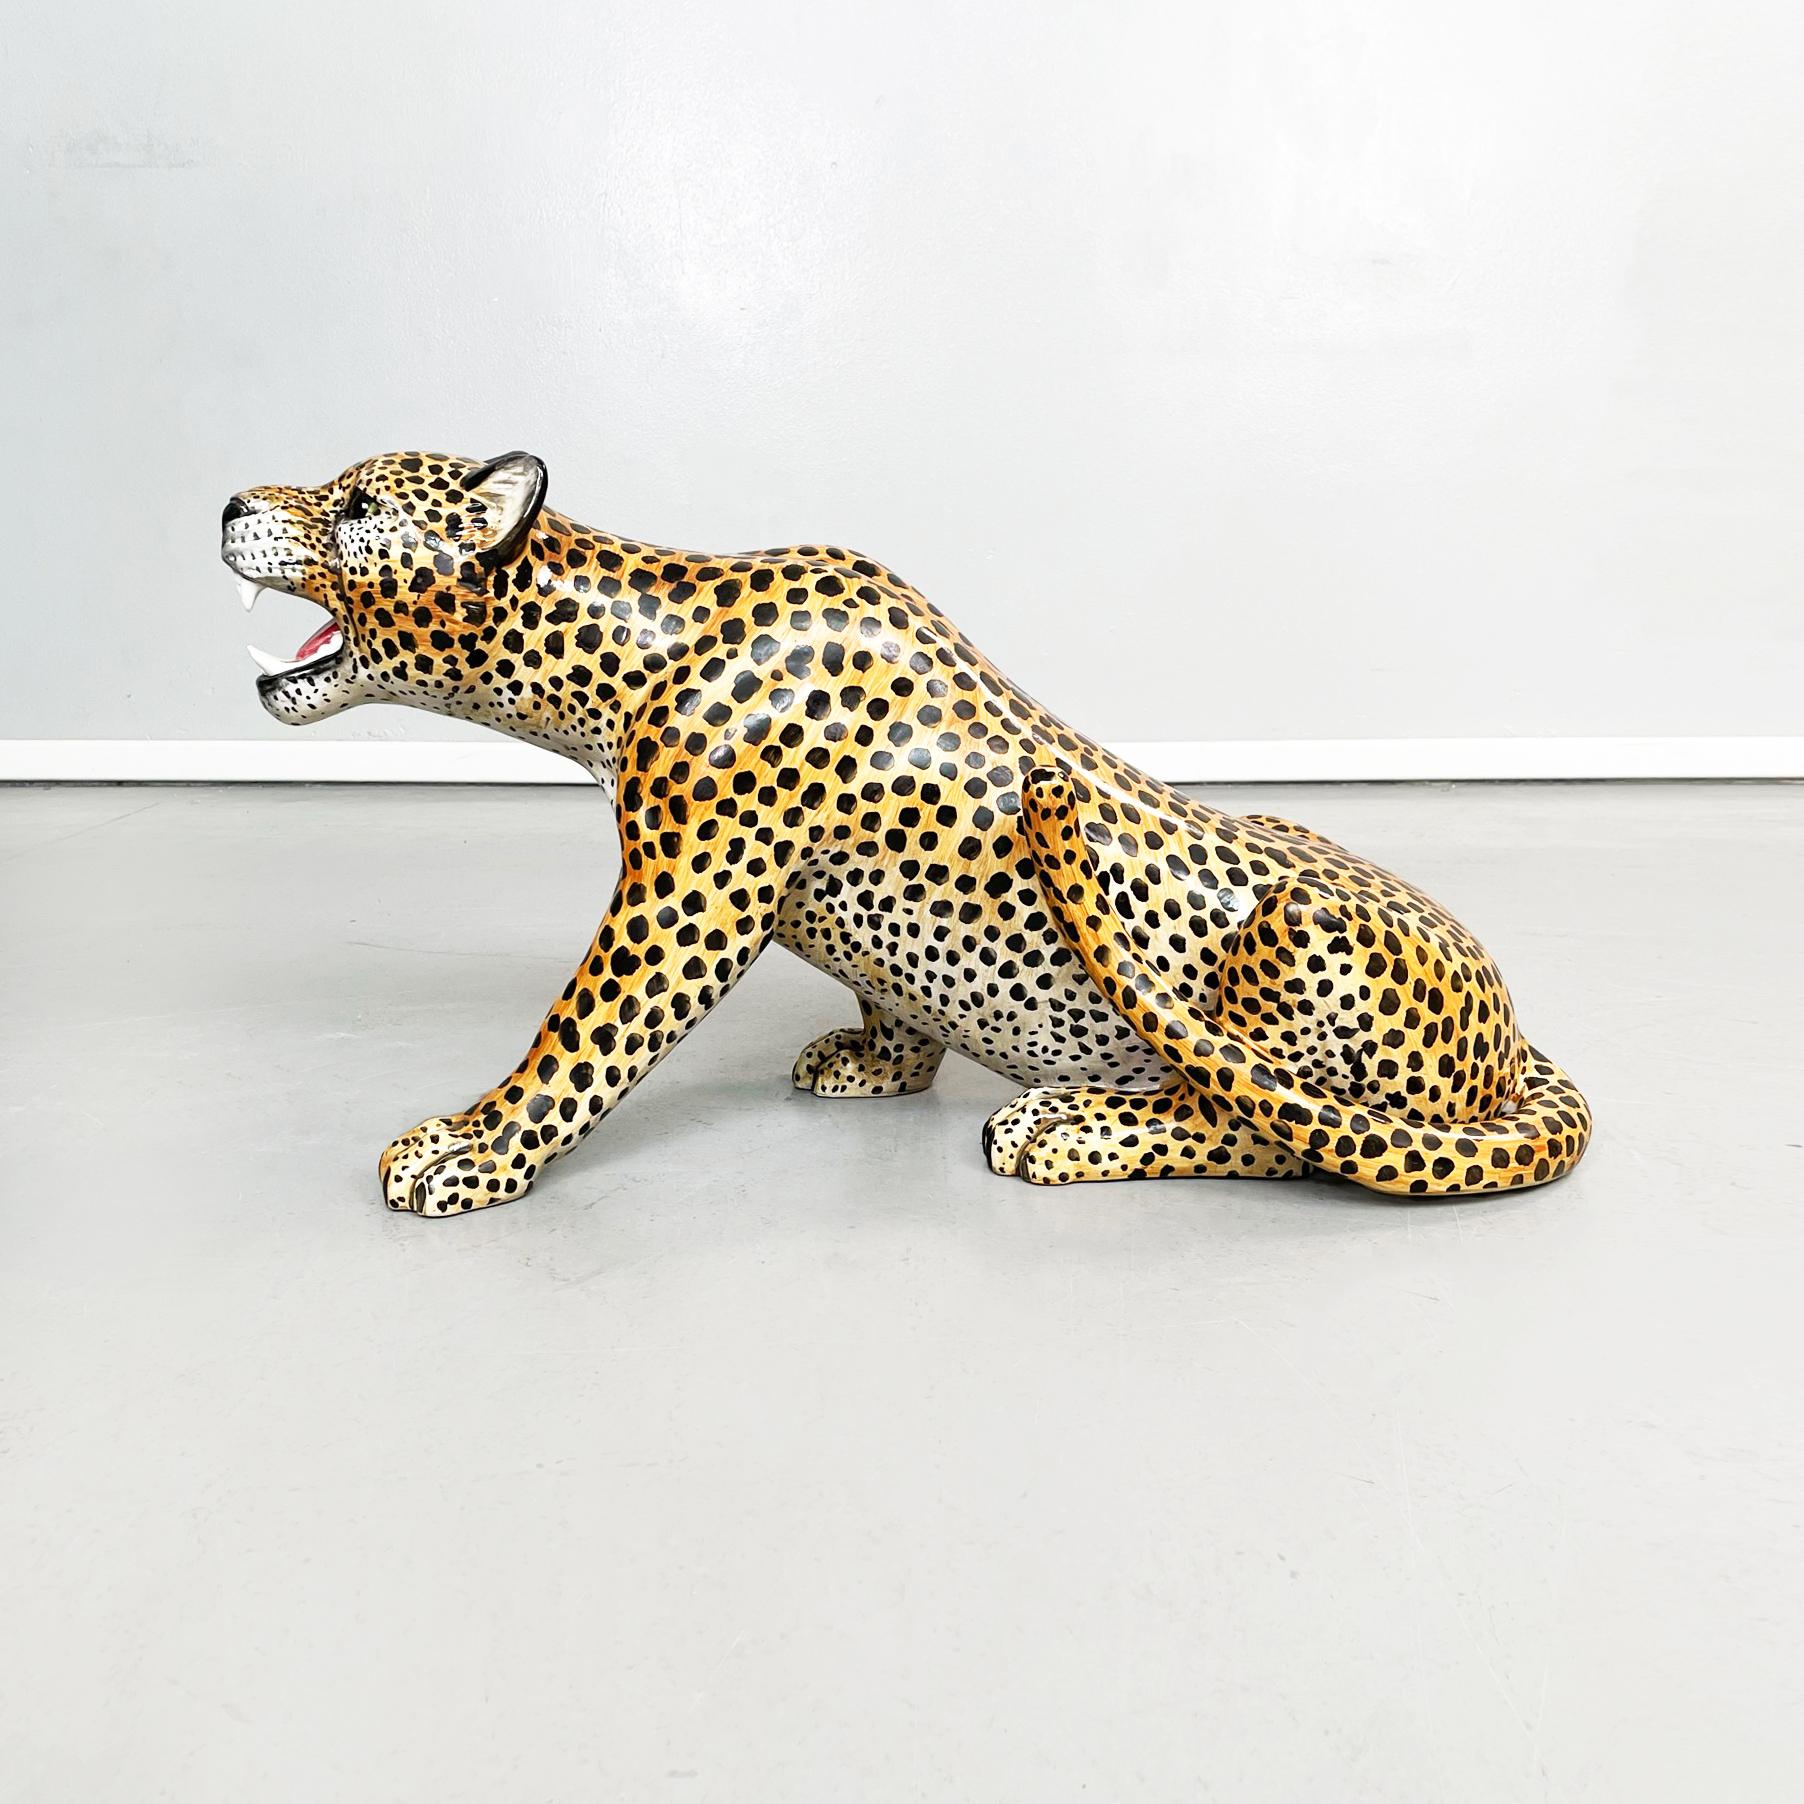 Italian Mid-Century Modern Ceramic Statue of a Feline Animal Cheetah, 1960s In Good Condition For Sale In MIlano, IT